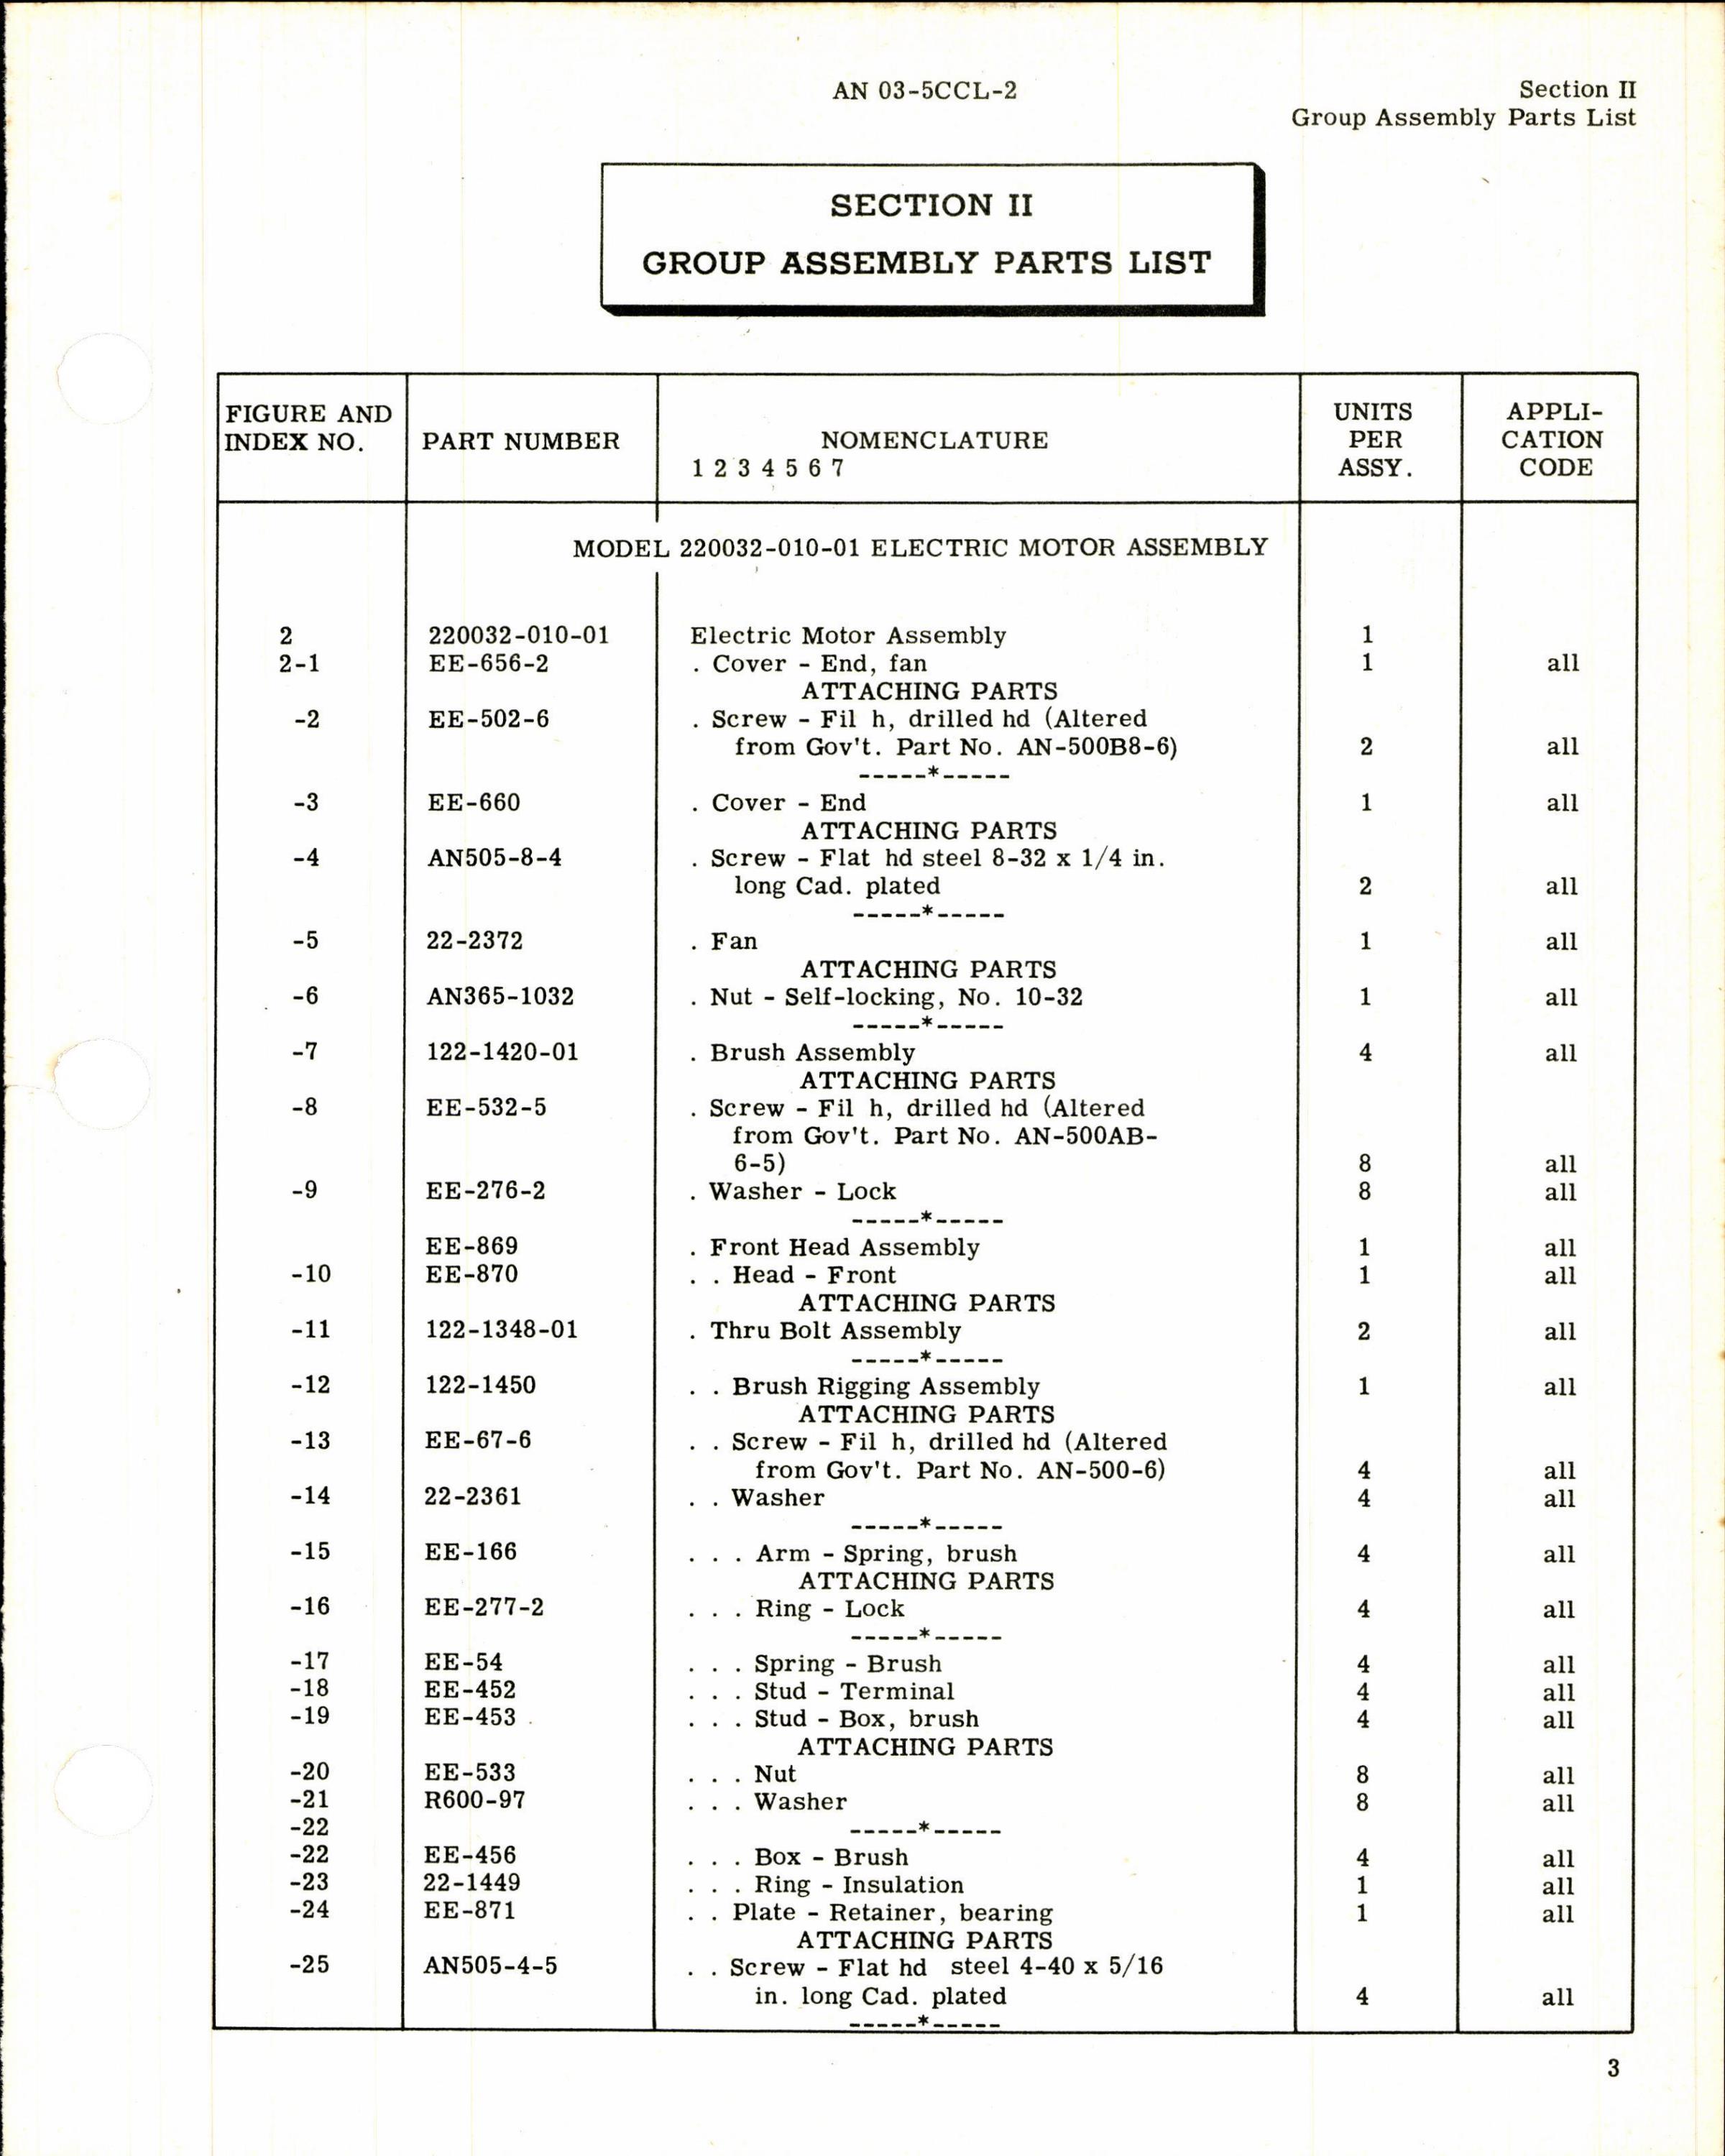 Sample page 5 from AirCorps Library document: Parts Catalog for Pesco Electric Motors, Model 220032 Series